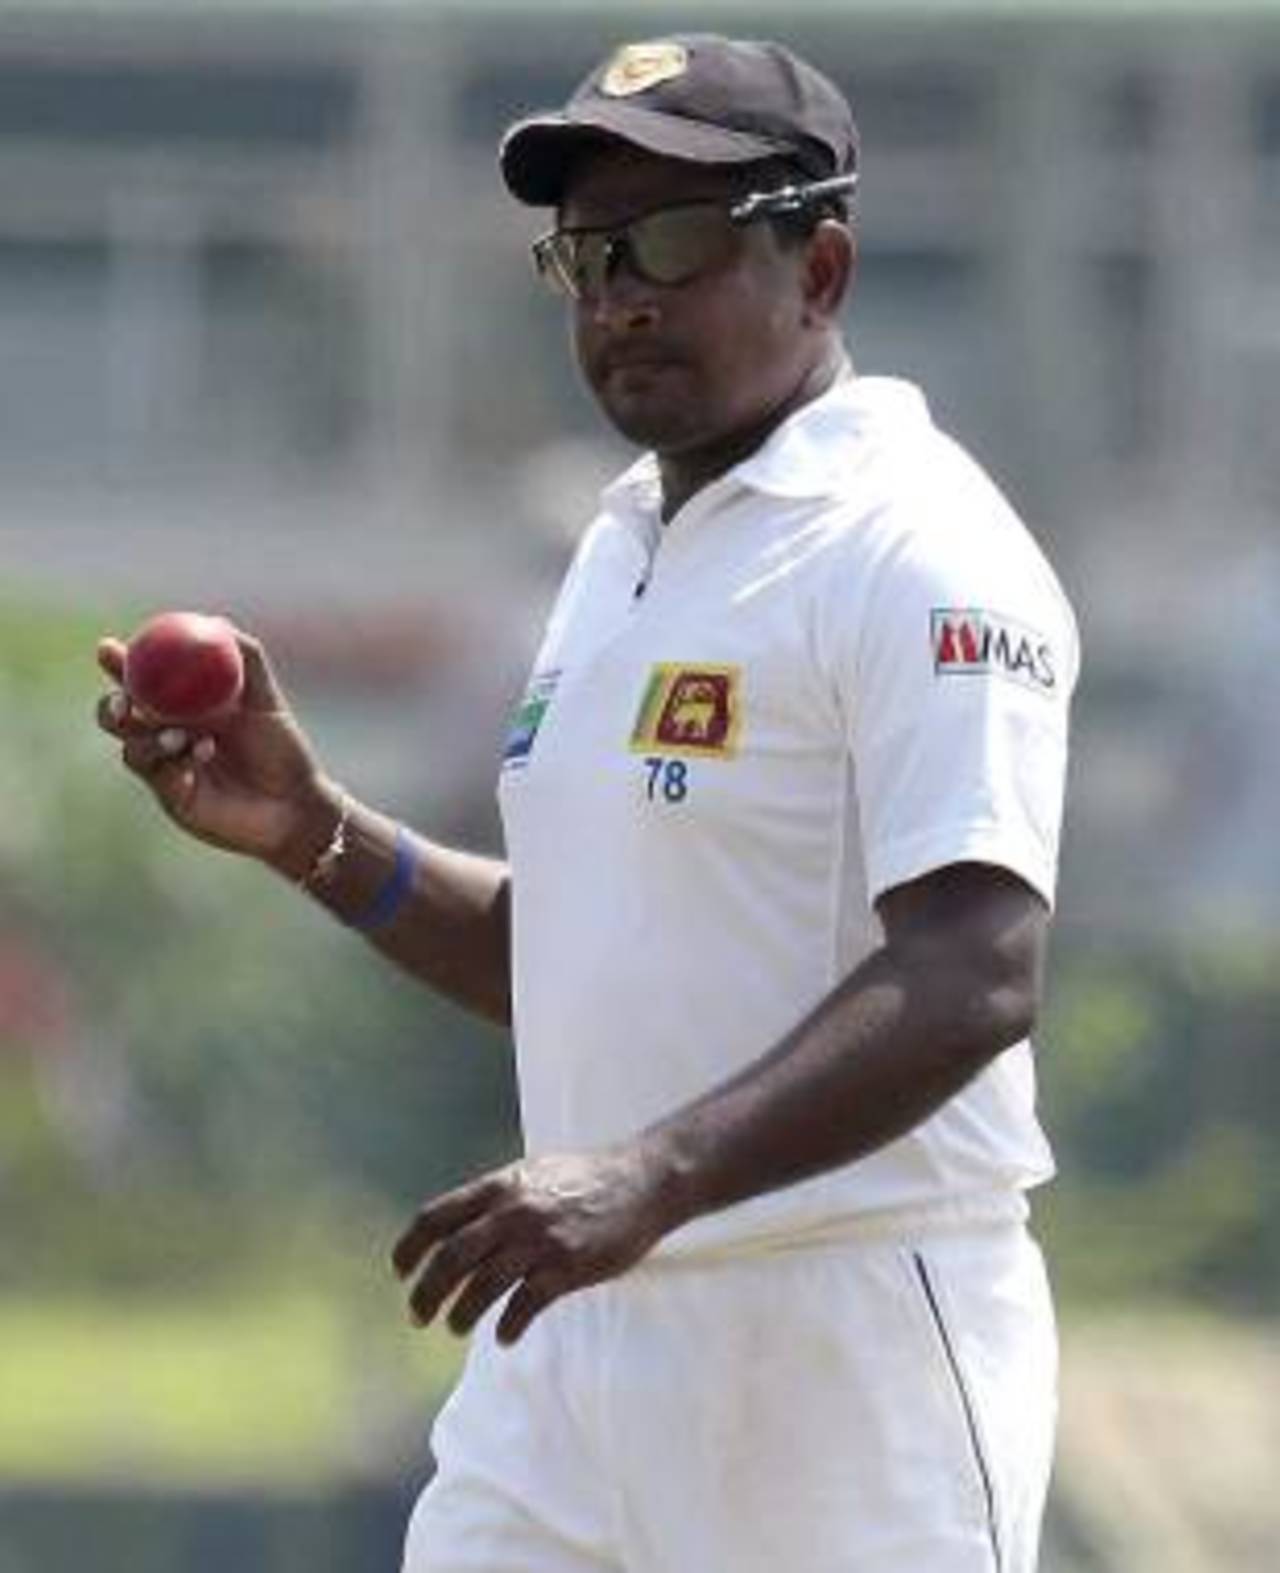 Rangana Herath's economy rate of 5.26 is one of the worst among bowlers who have conceded 100 or more runs in the fourth innings of a Test&nbsp;&nbsp;&bull;&nbsp;&nbsp;Associated Press